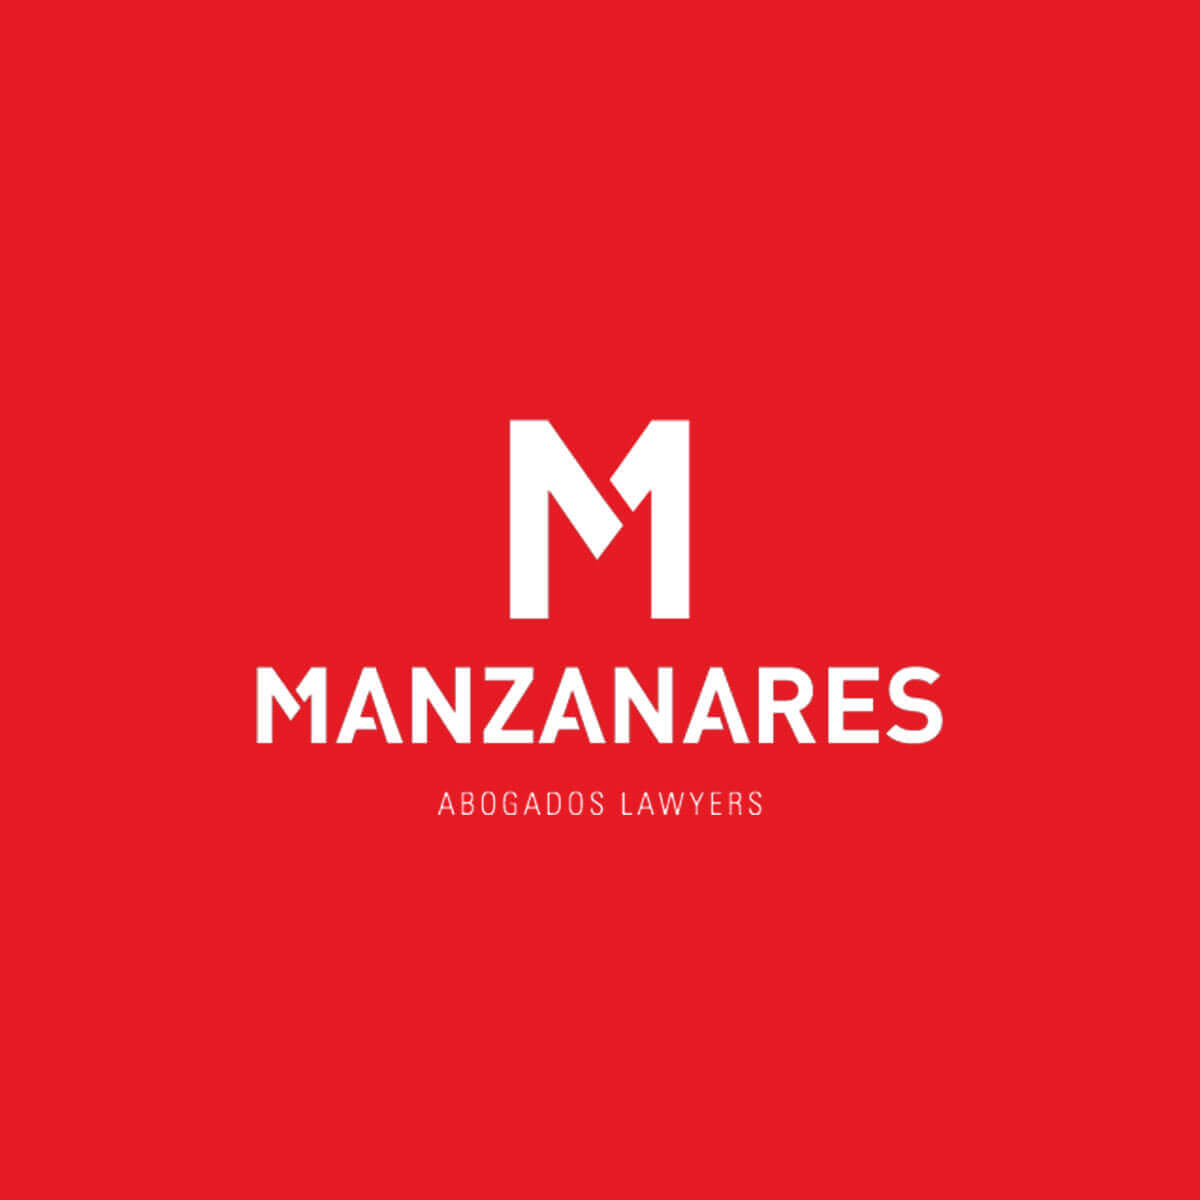 Manzanares International Lawyers. Building trust. Recommended Associates